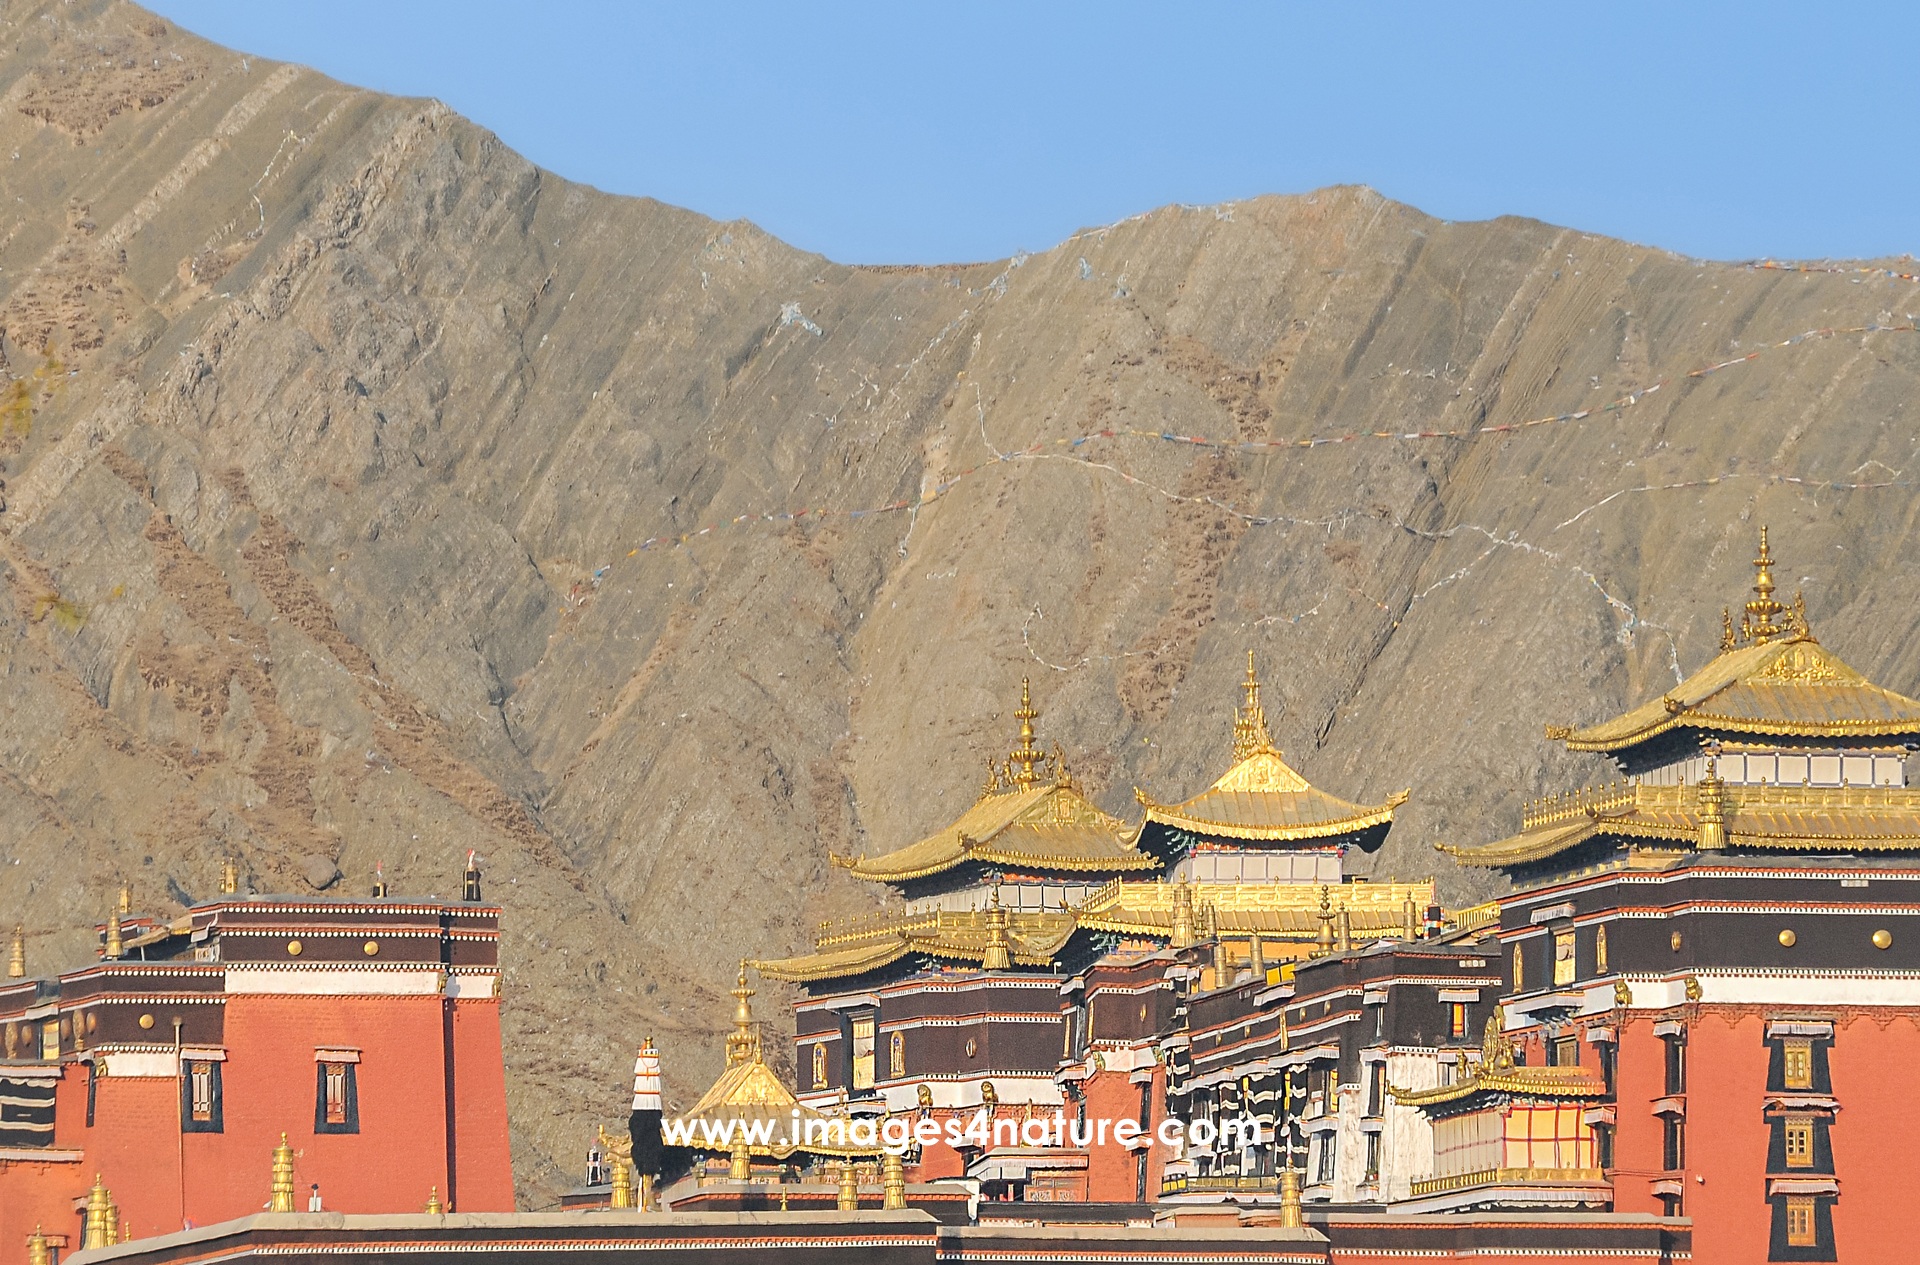 Red buildings with artfully decorated golden roof against mountain ridge